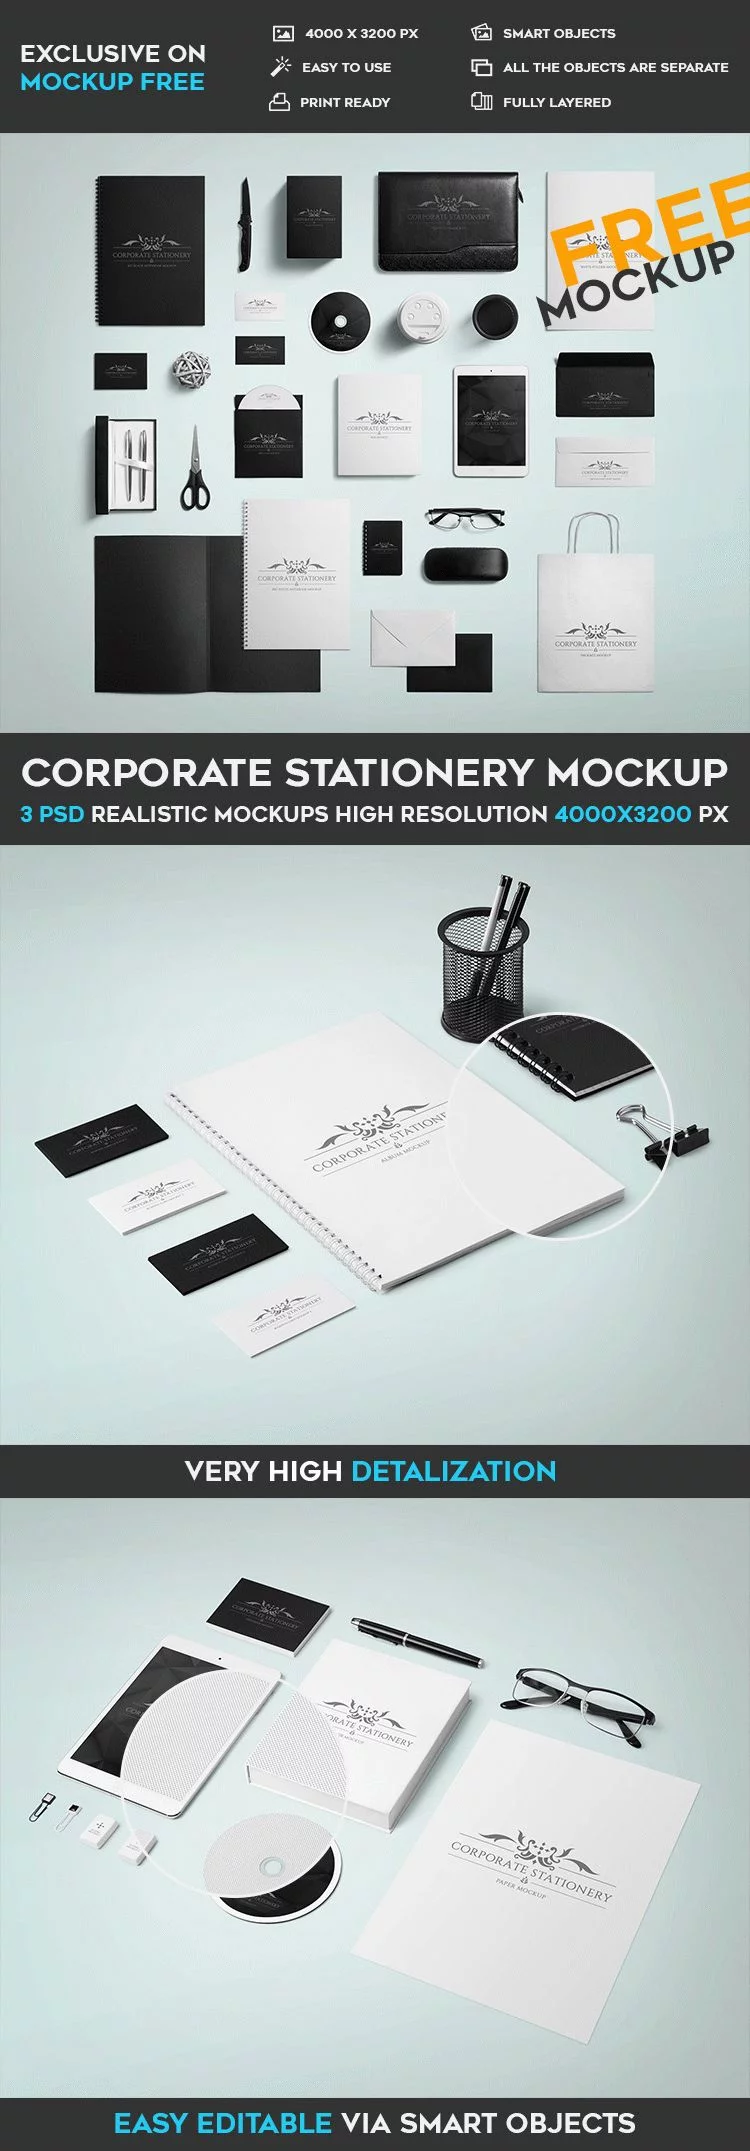 bigpreview_corporate-stationery